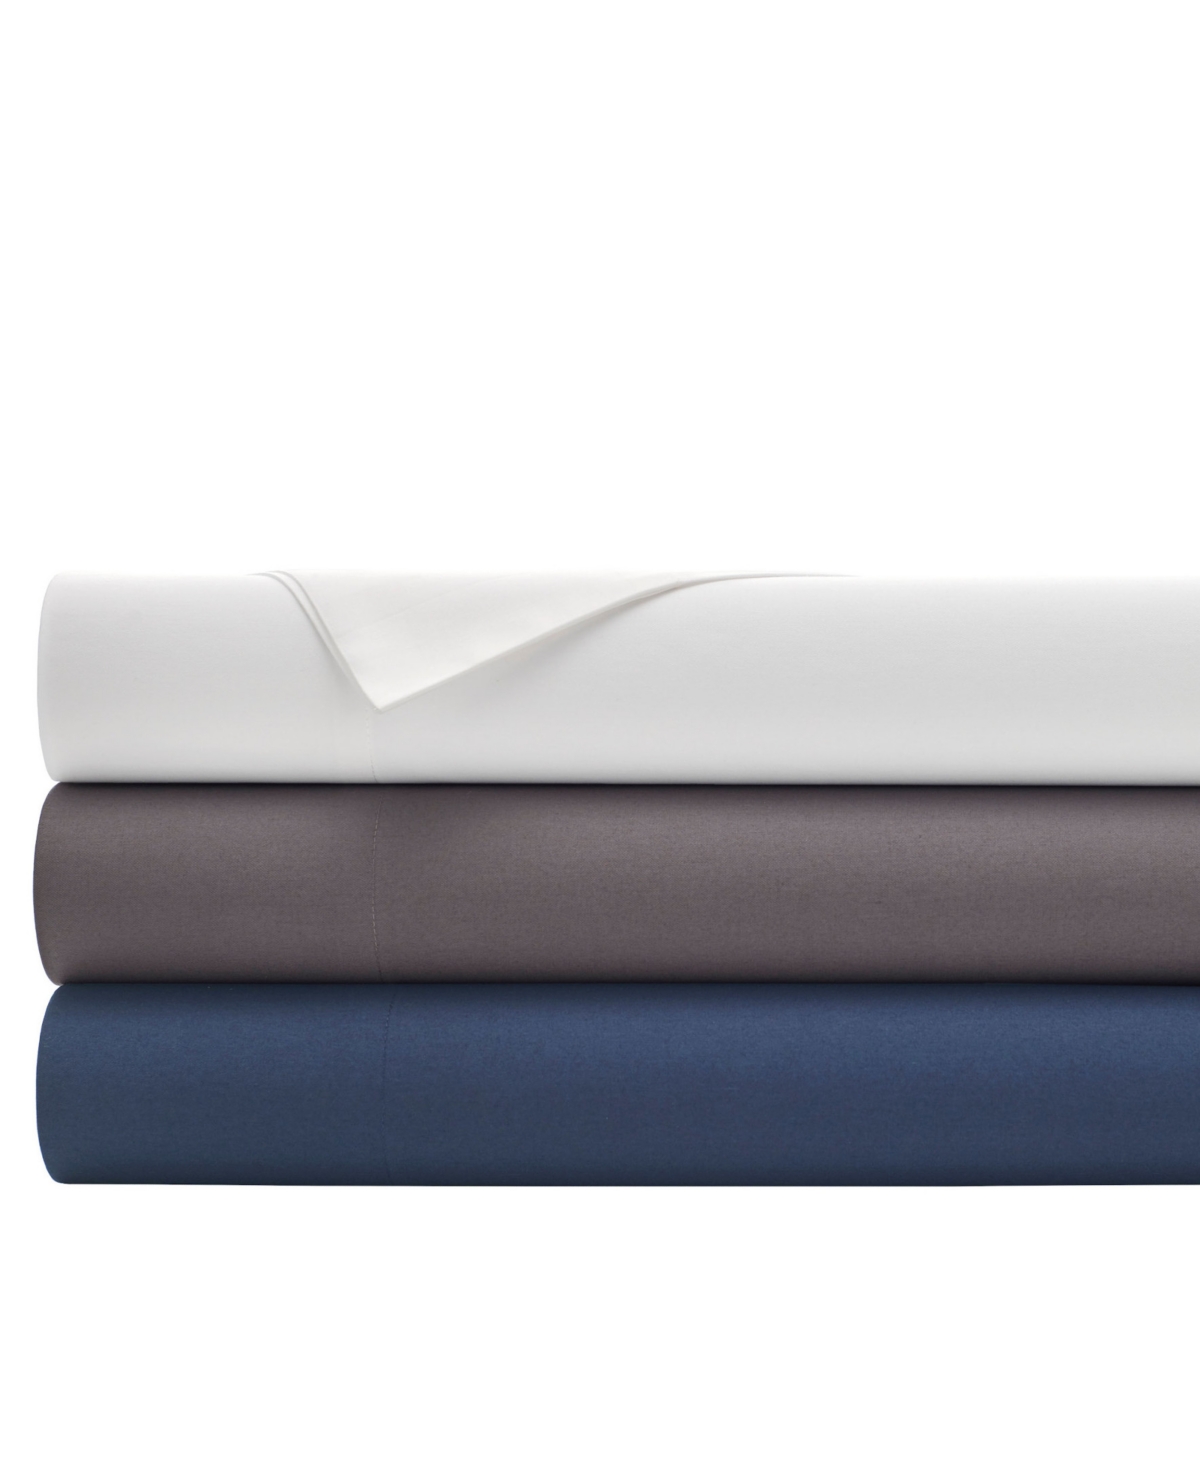 Kenneth Cole New York Micro Twill Twin Sheet Set Bedding In Navy